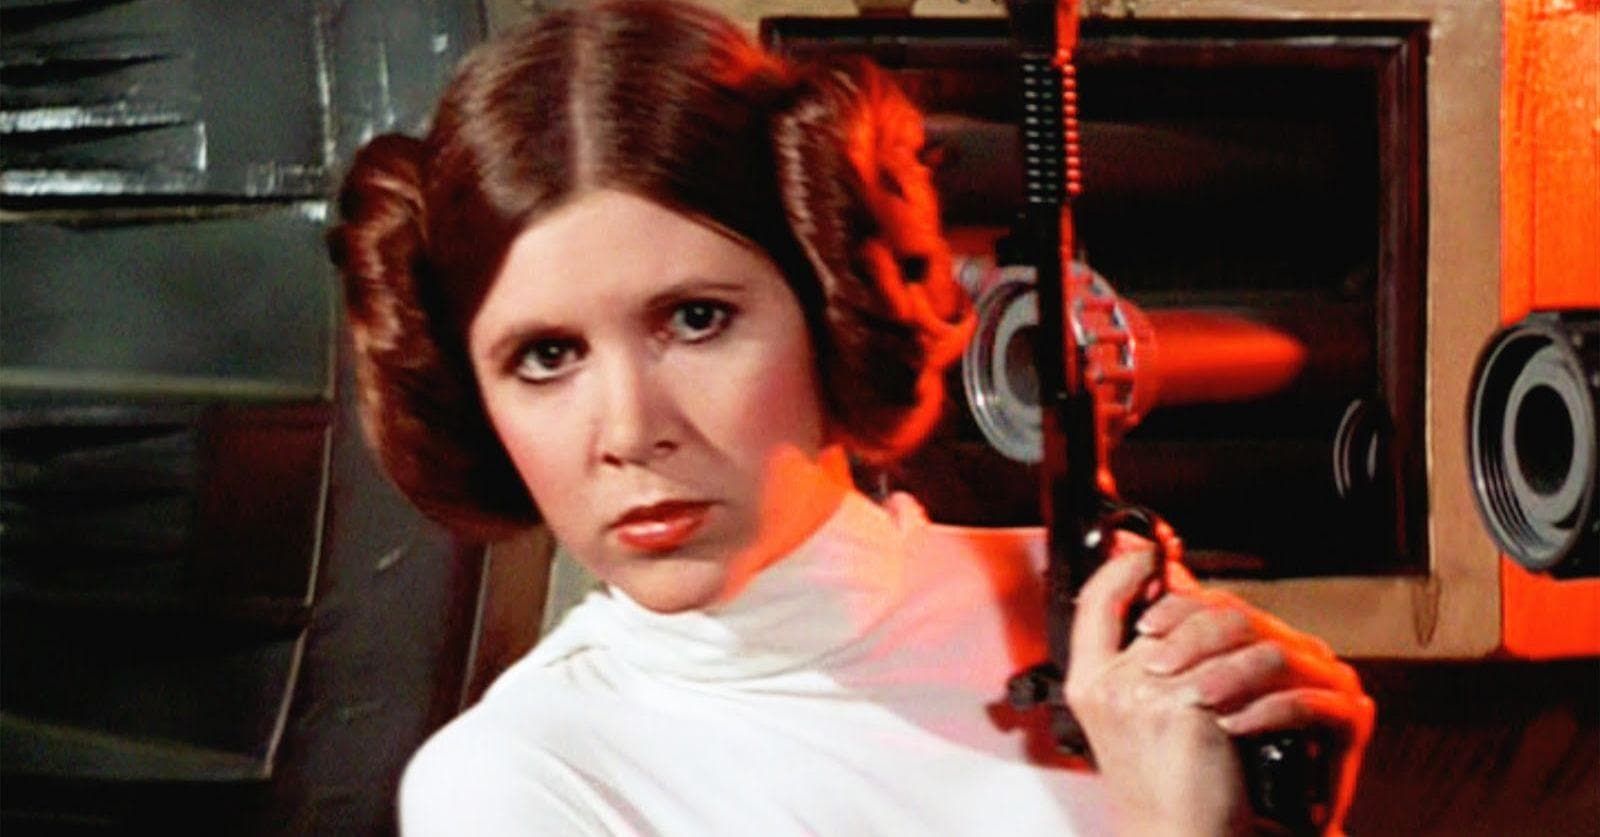 You get strangled by your bra: George Lucas Did Not Want Carrie Fisher to  Wear Underwear in Star Wars Movies